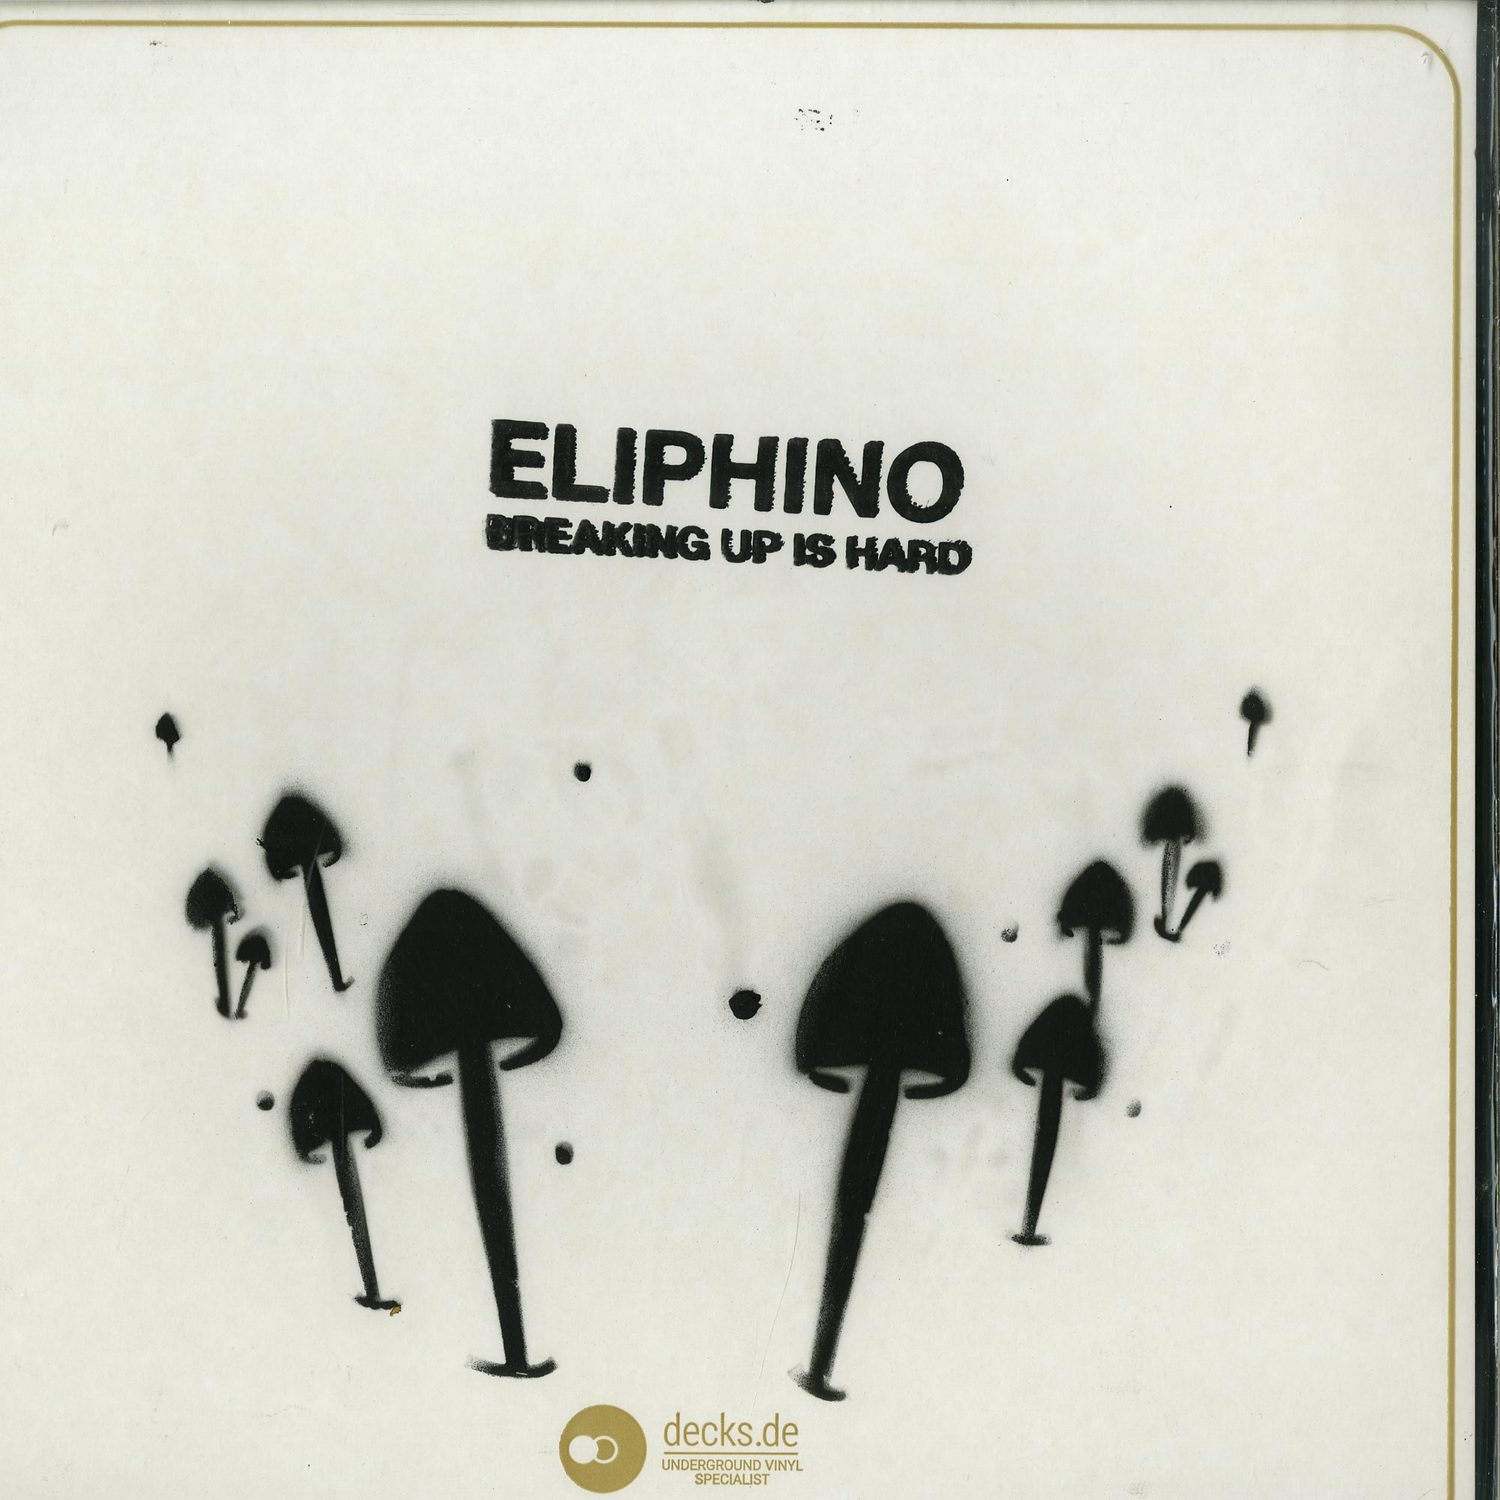 Eliphino - BREAKING UP IS HARD 